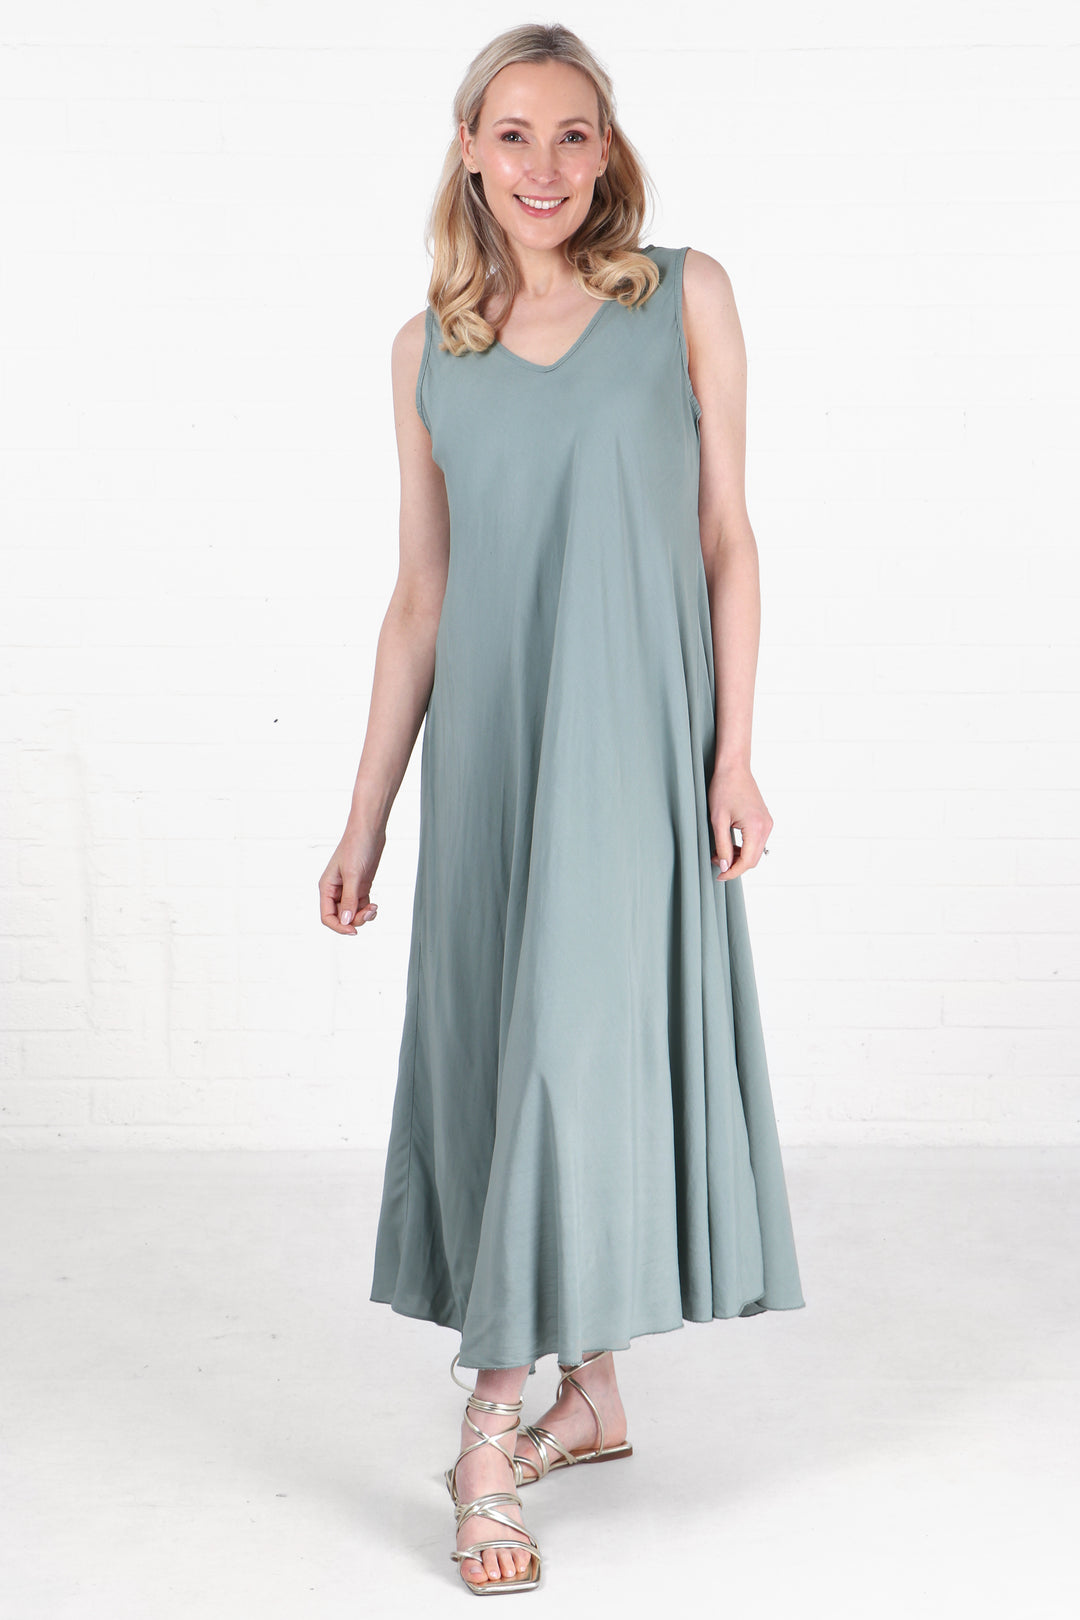 model wearing a sage green summer maxi dress with v neck and a loose fitting aline shape